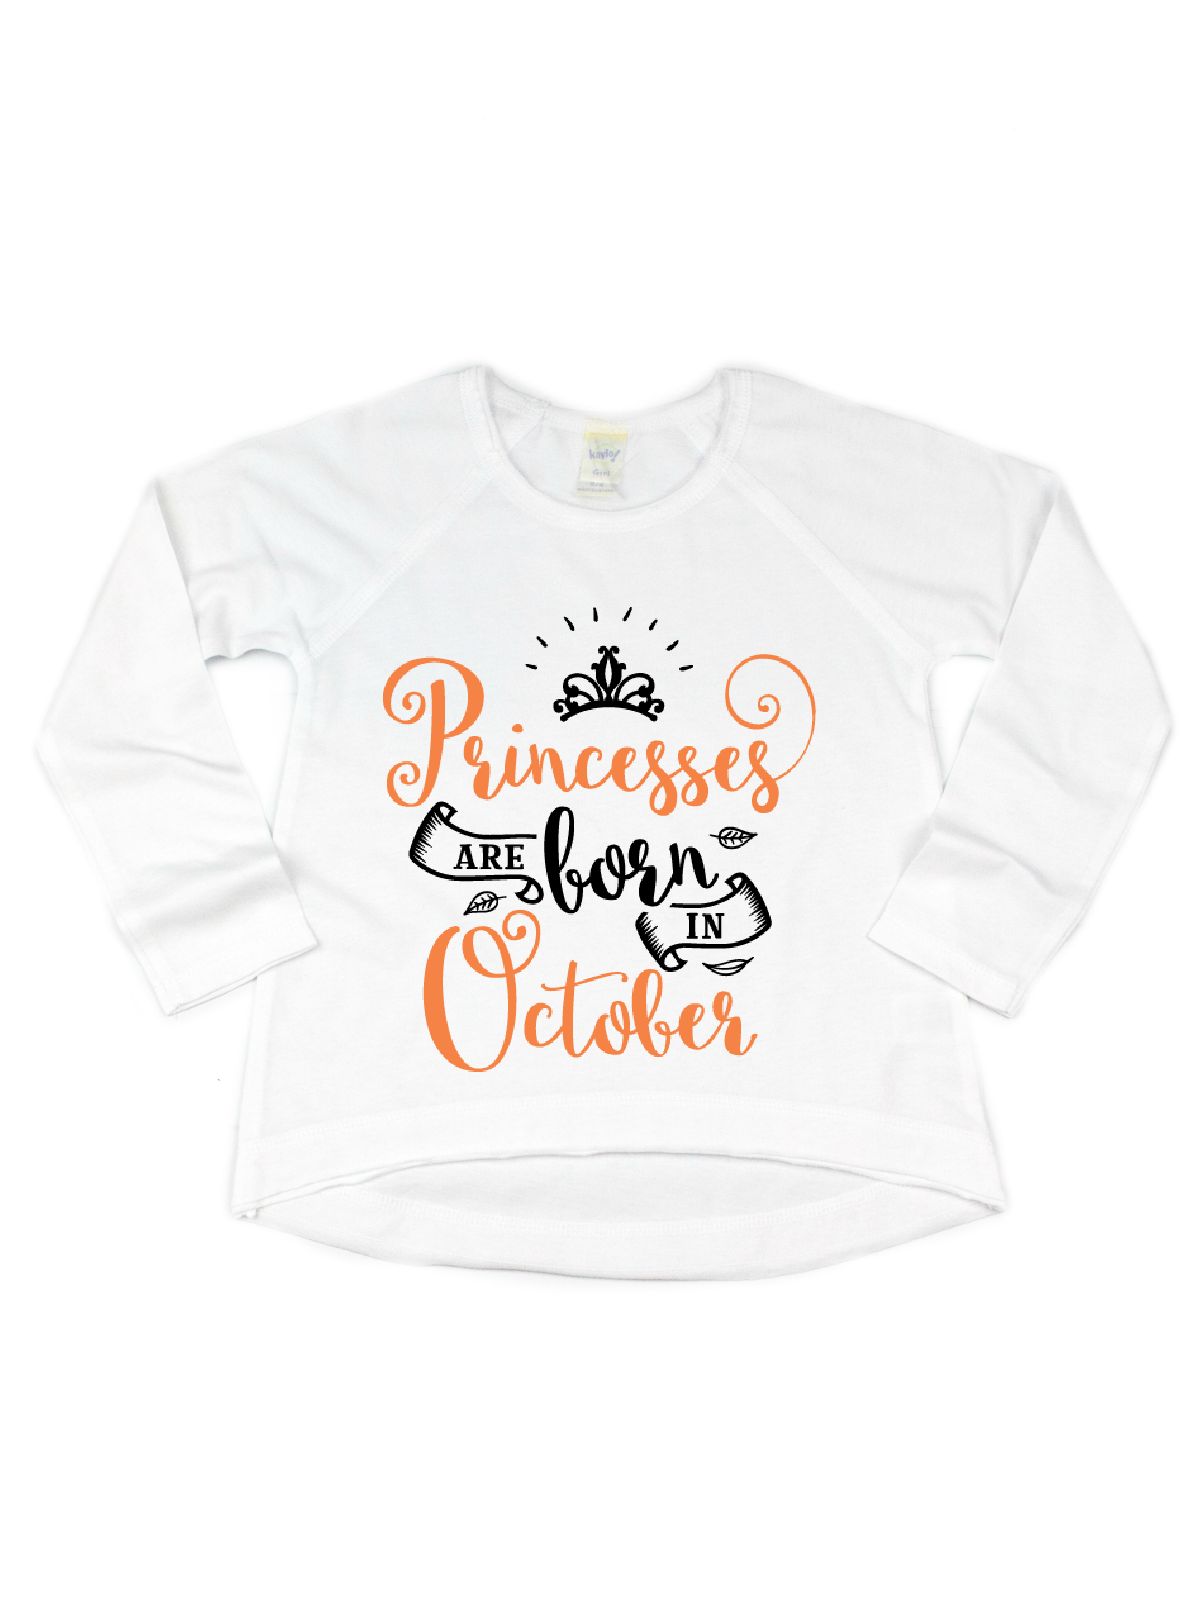 princesses are born in october long sleeve white shirt